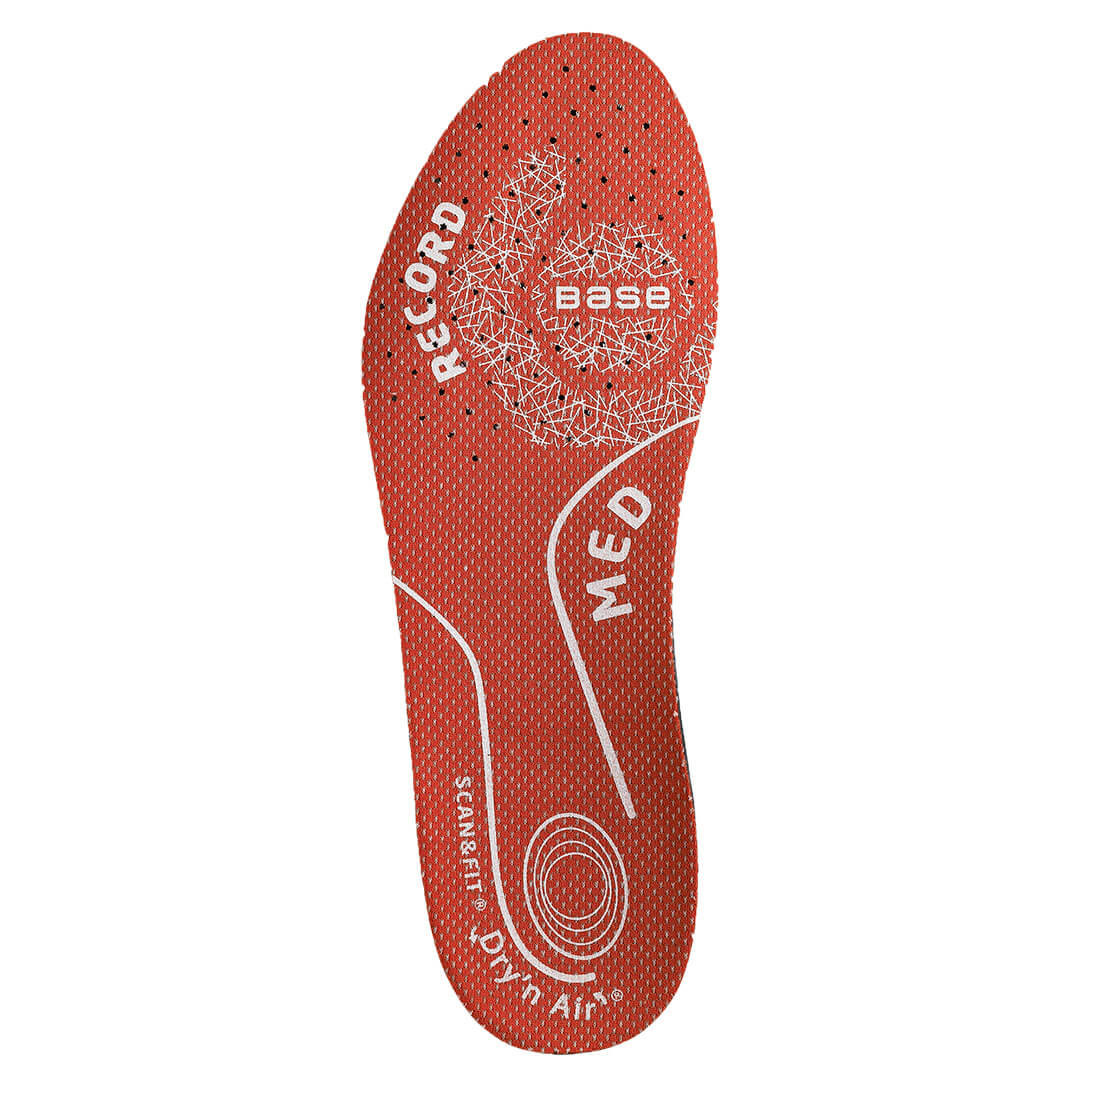 Dry'n Air Scan&Fit Record - Med Insole - Footwear